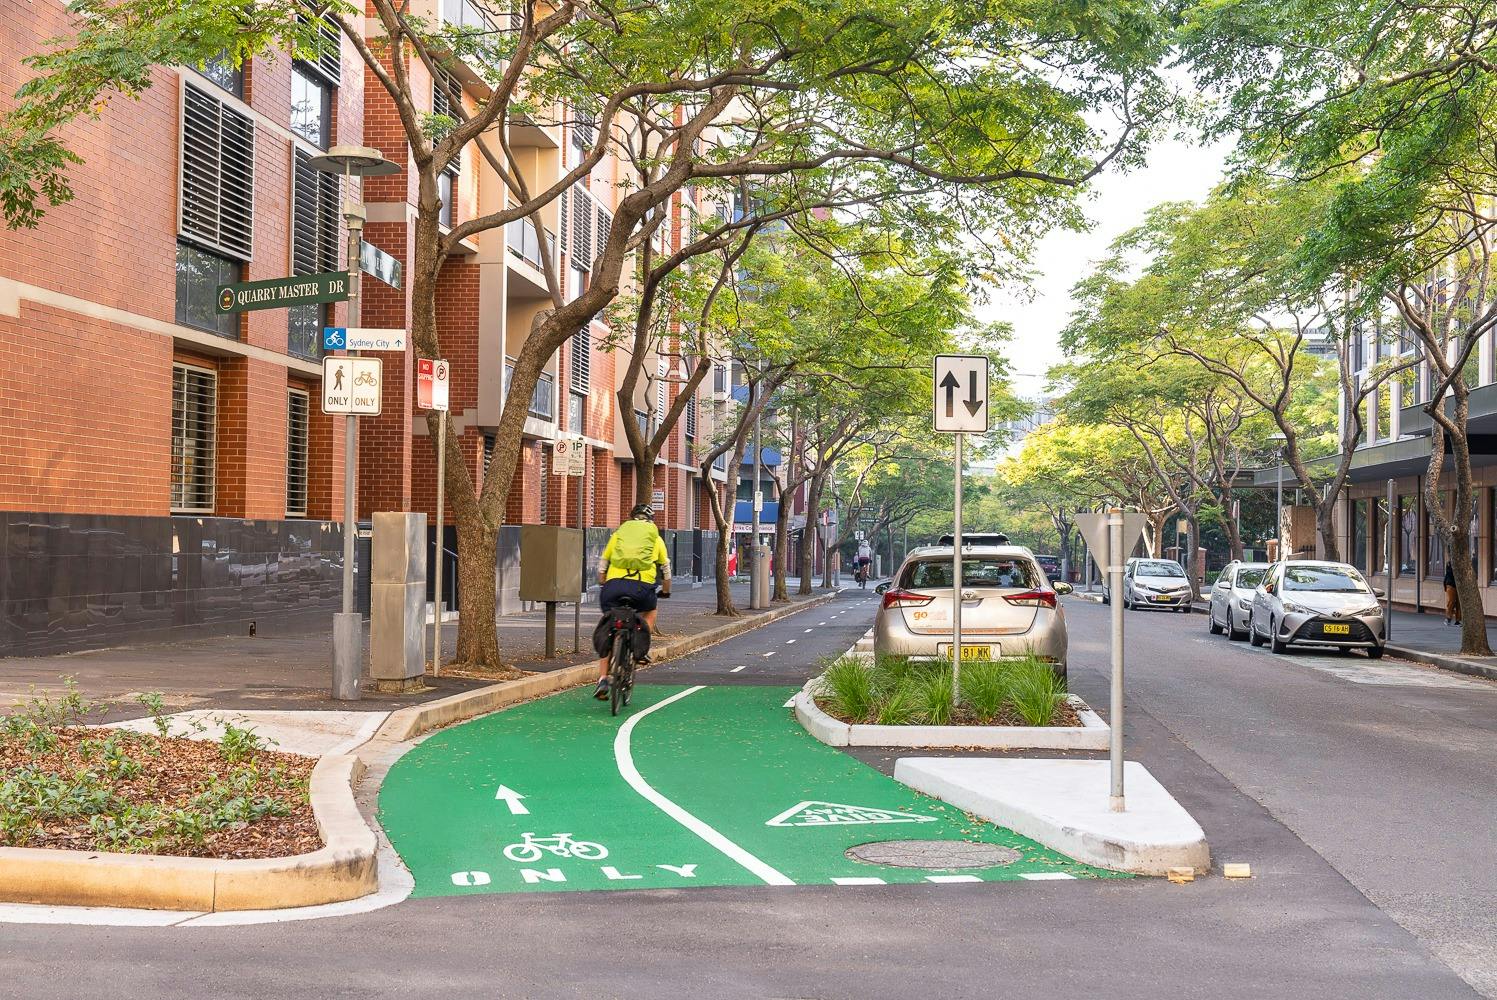 Example of a permanent installation of a protected, on-road bike lane